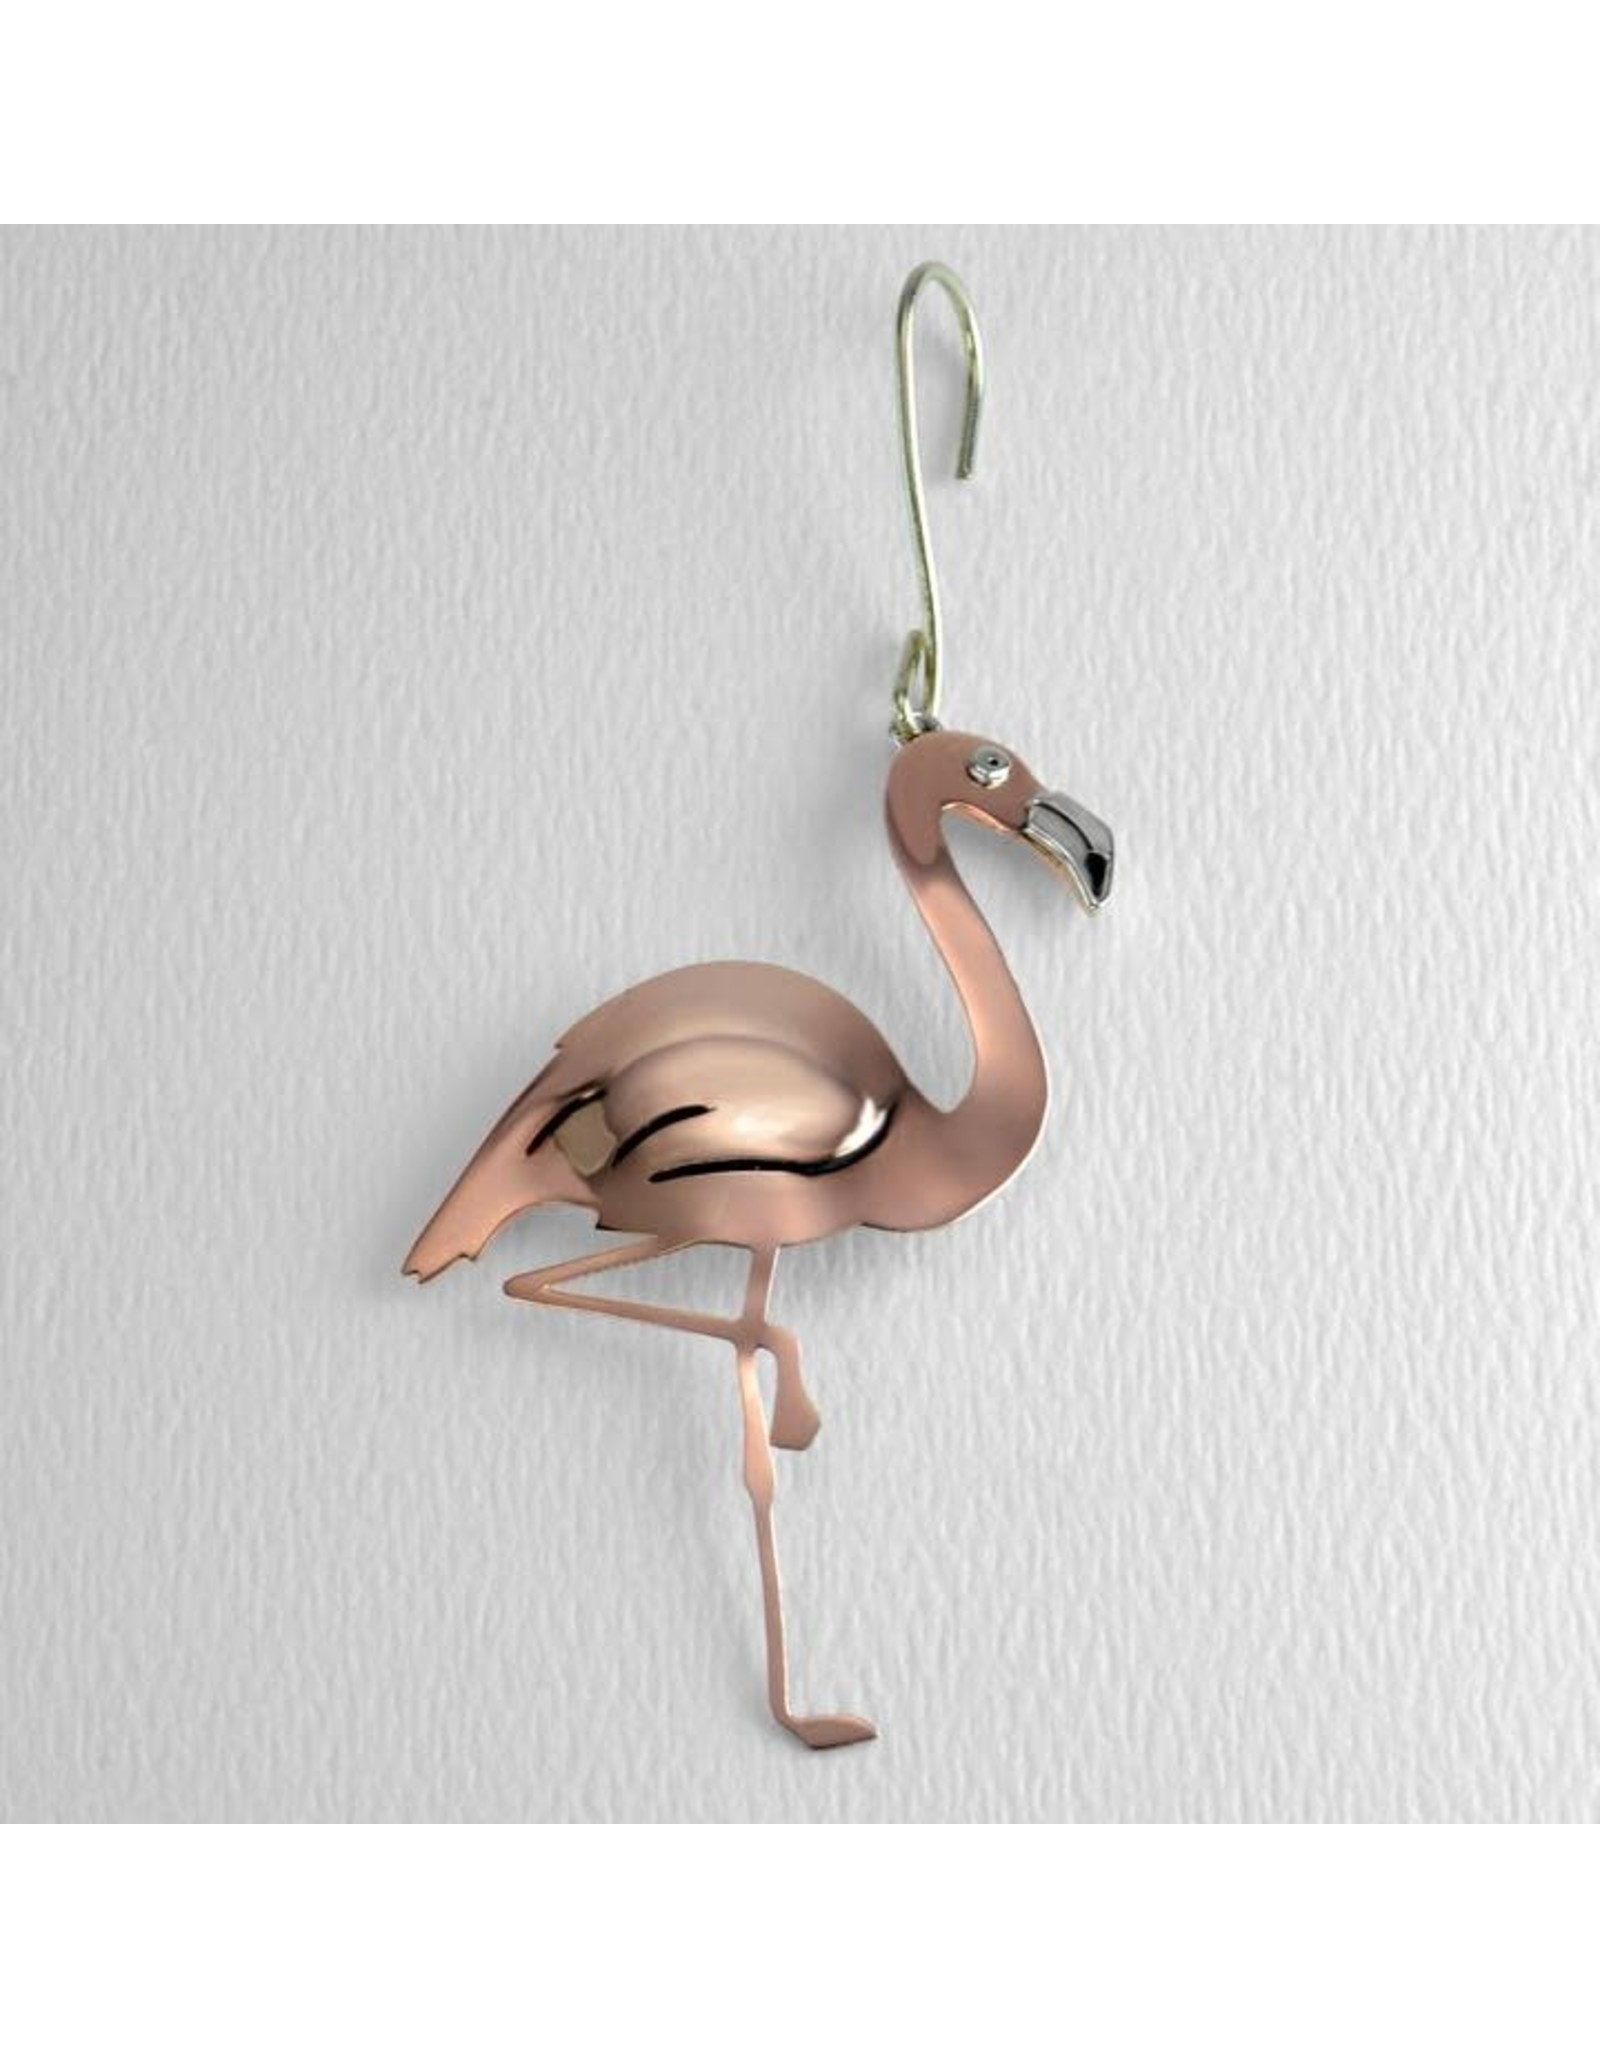 Trade roots Ornament and Charm Flamingo, Mexico